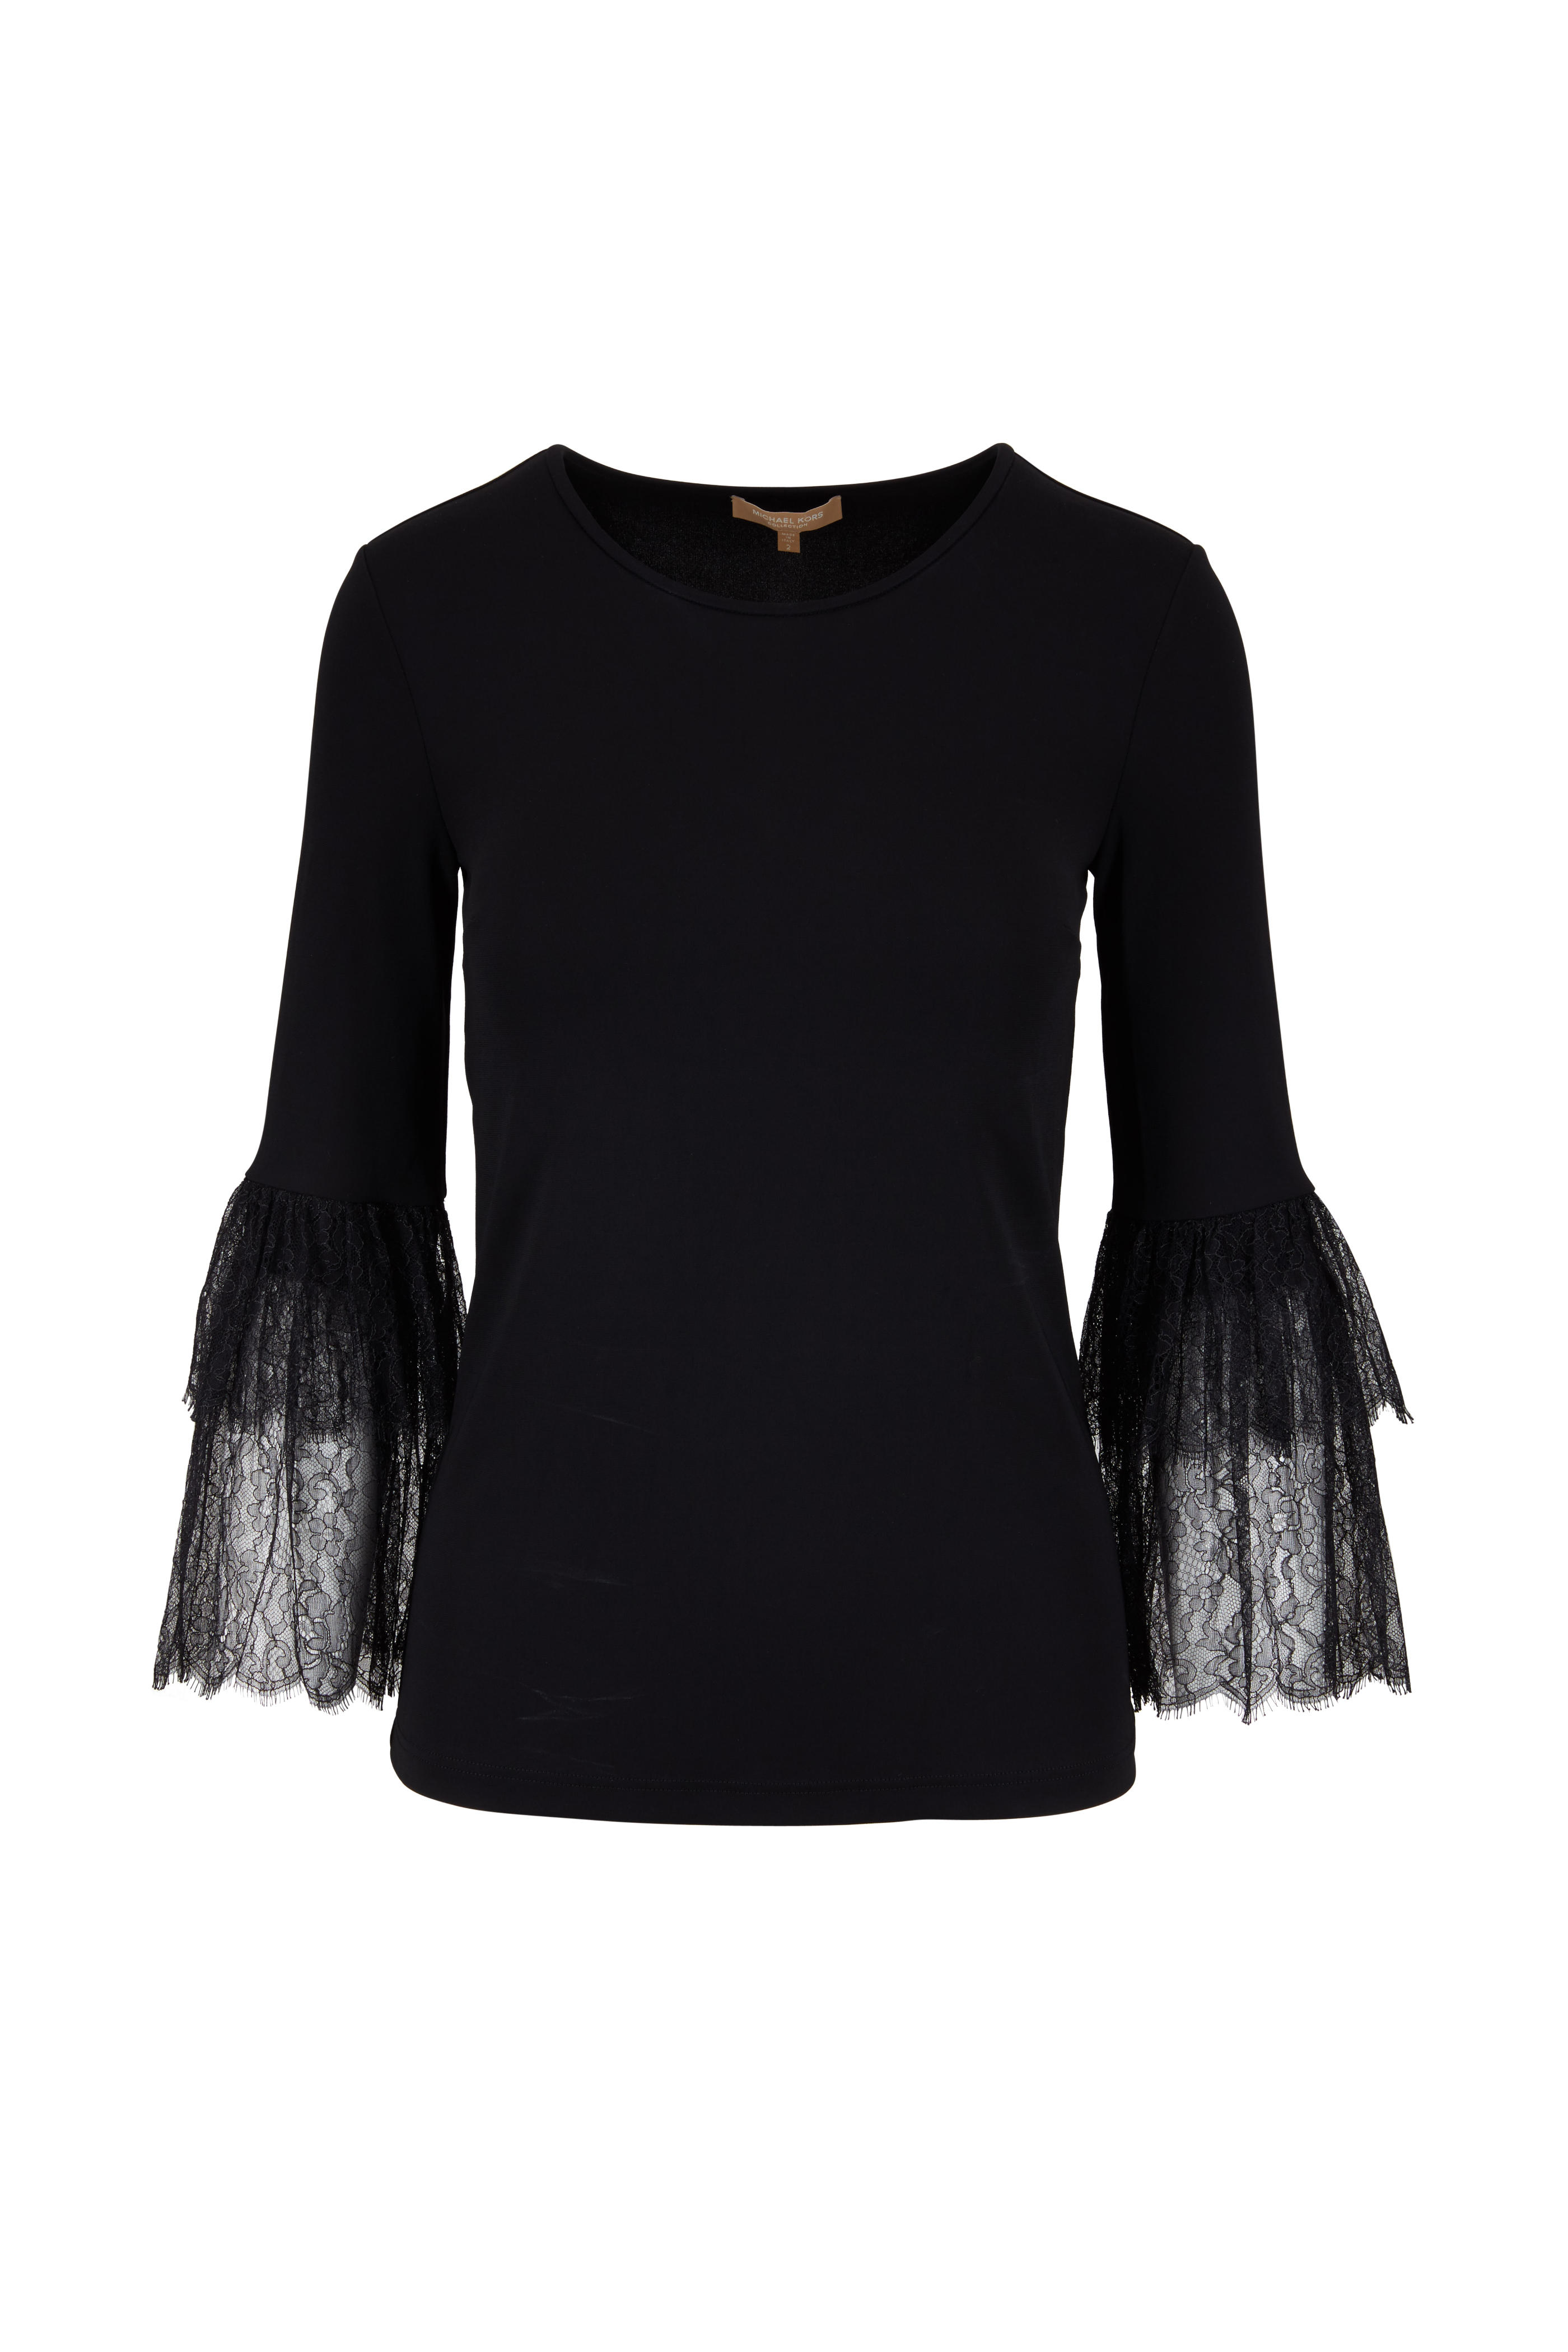 Black Lace Trim Bell Sleeve Top 